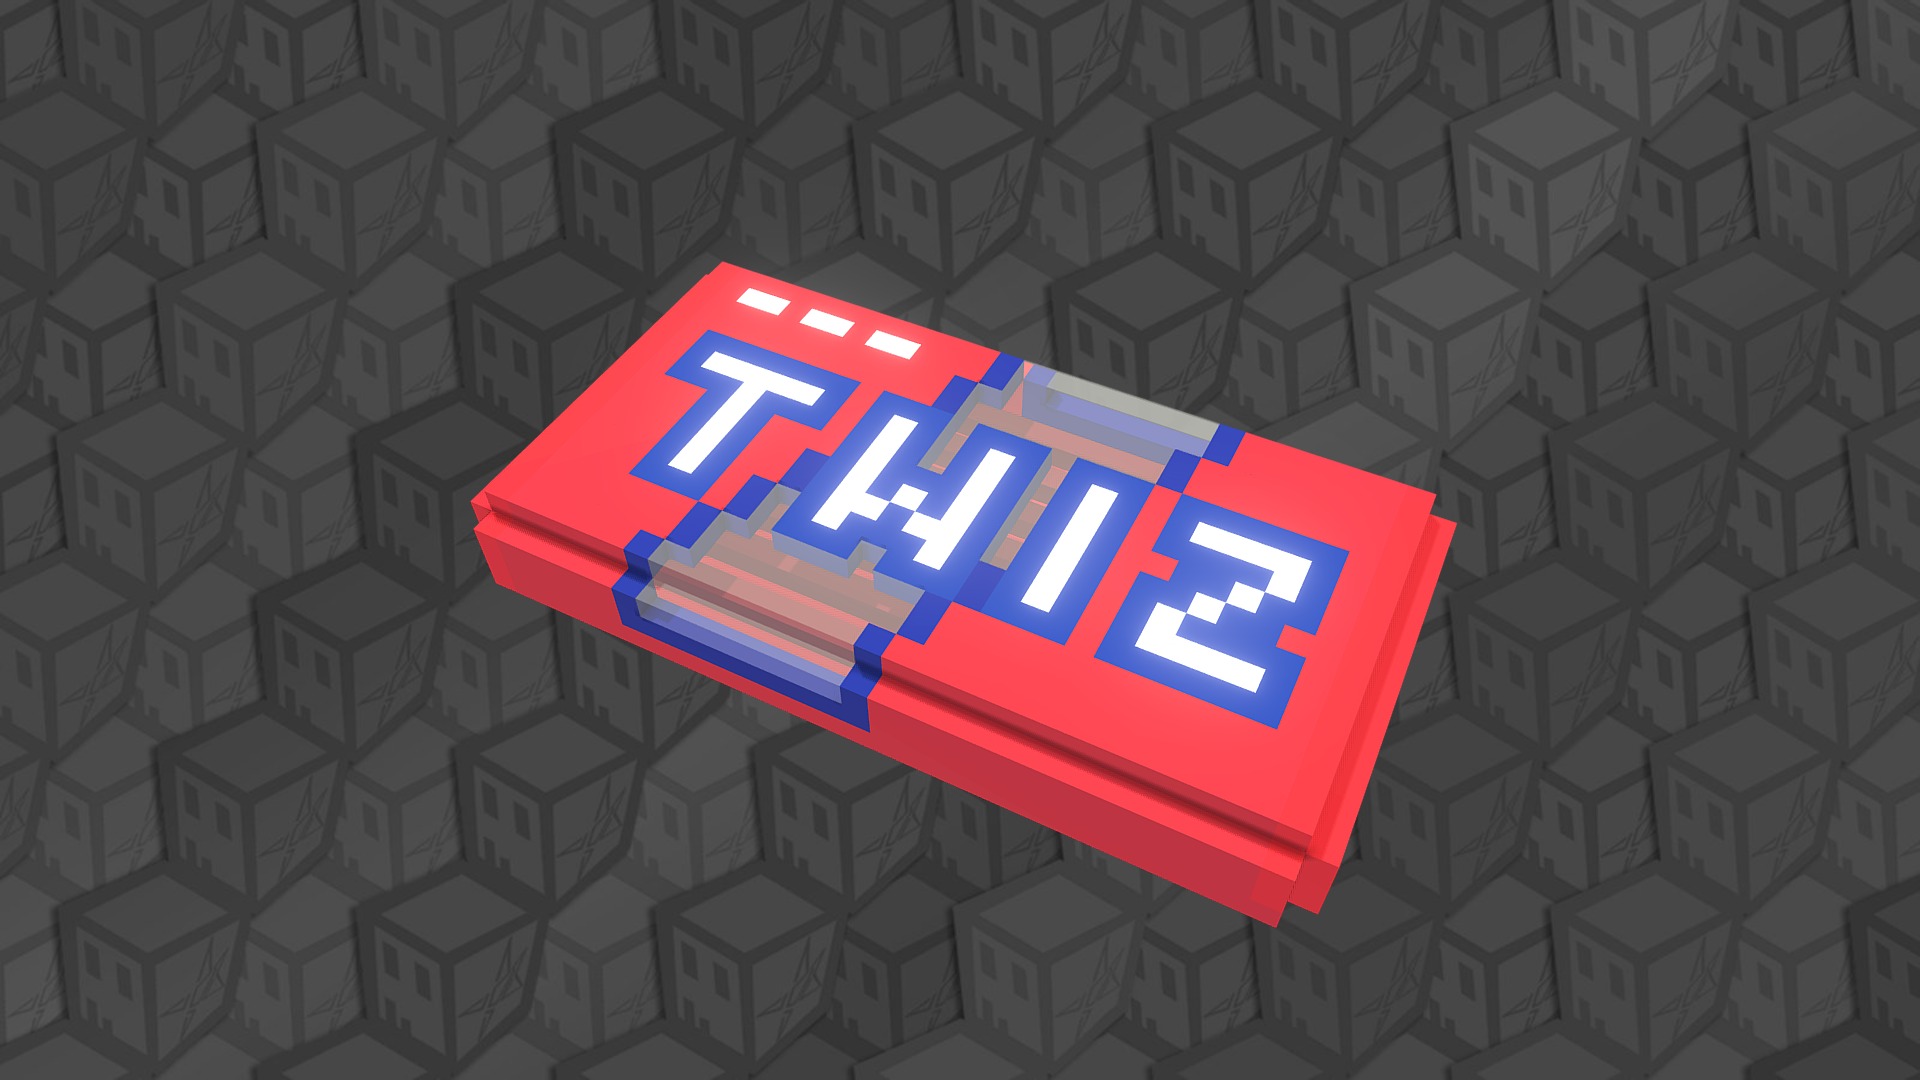 3D model Twiz Candy – Minecraft Resource Pack + Models - This is a 3D model of the Twiz Candy - Minecraft Resource Pack + Models. The 3D model is about a red and blue card on a pile of money.